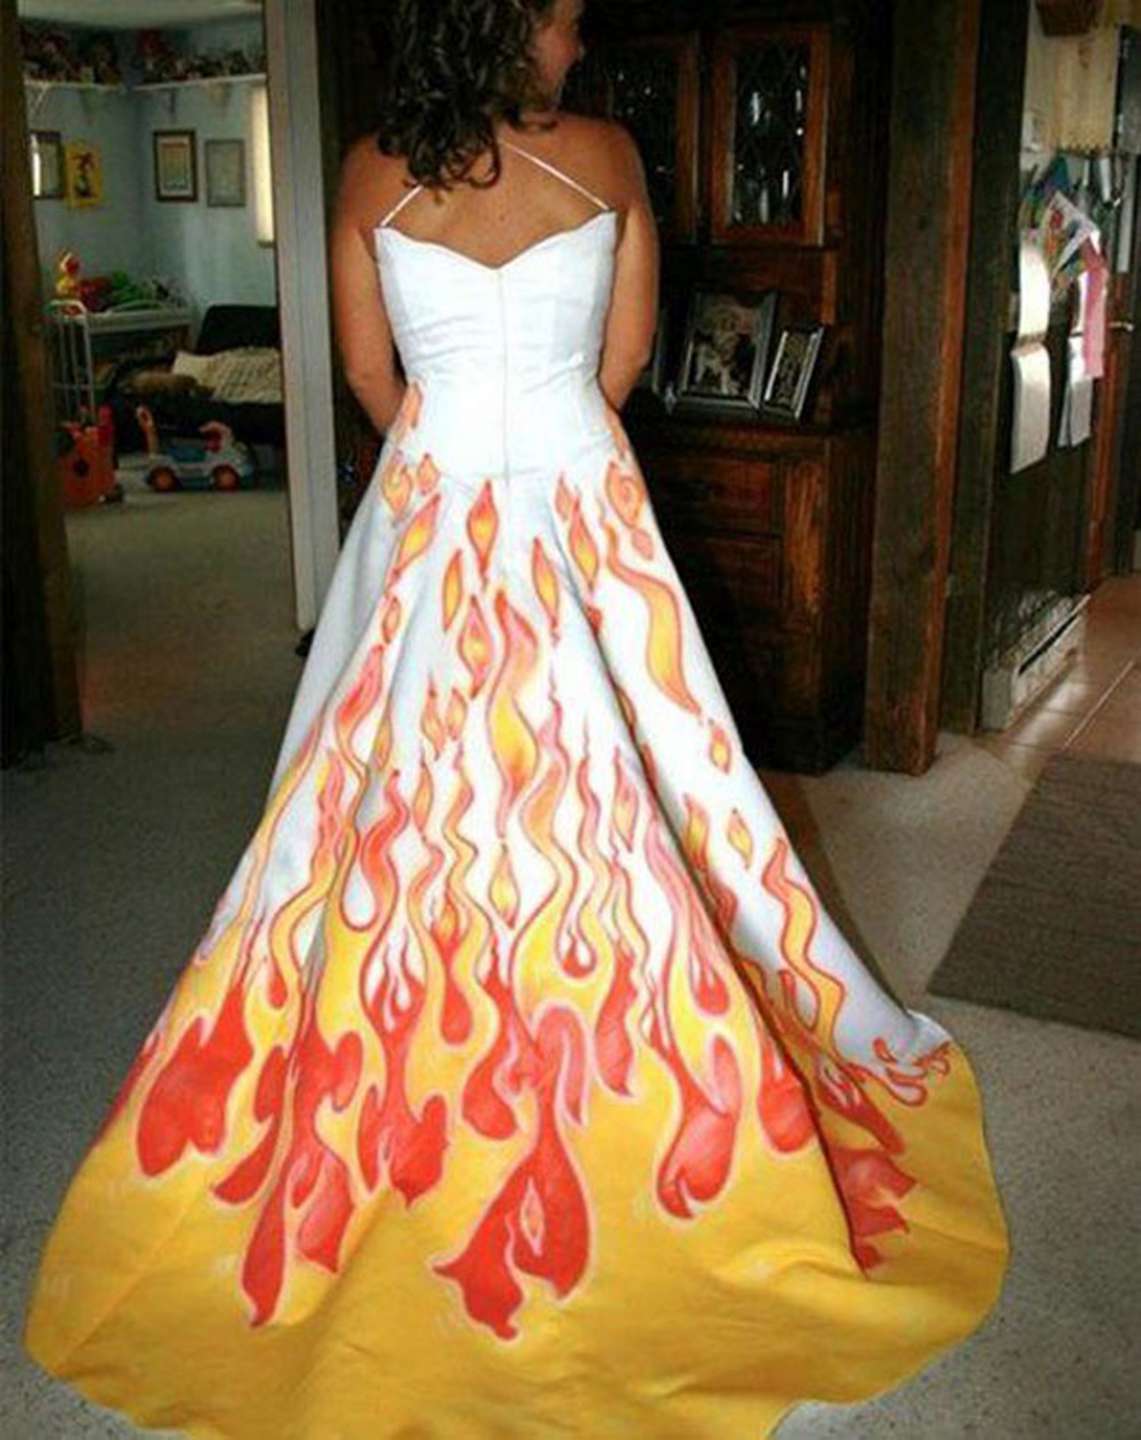 13_Of_The_Worst_Wedding_Dresses_You’ve_Ever_Seen_8